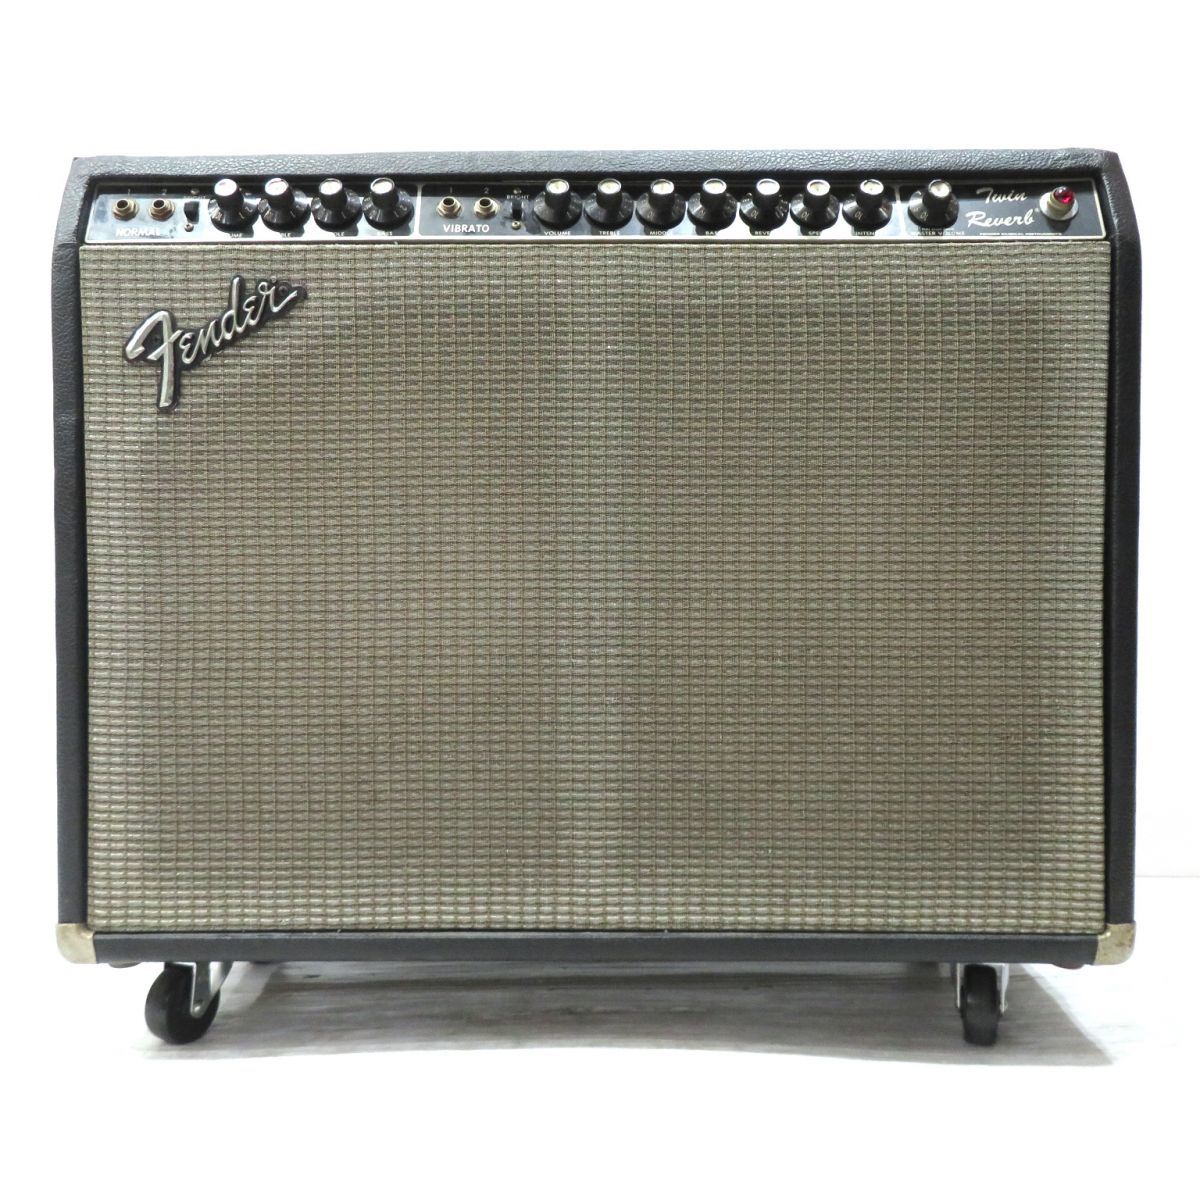 093s☆Fender フェンダー 1974 Twin Reverb ギター用 アンプ コンボ